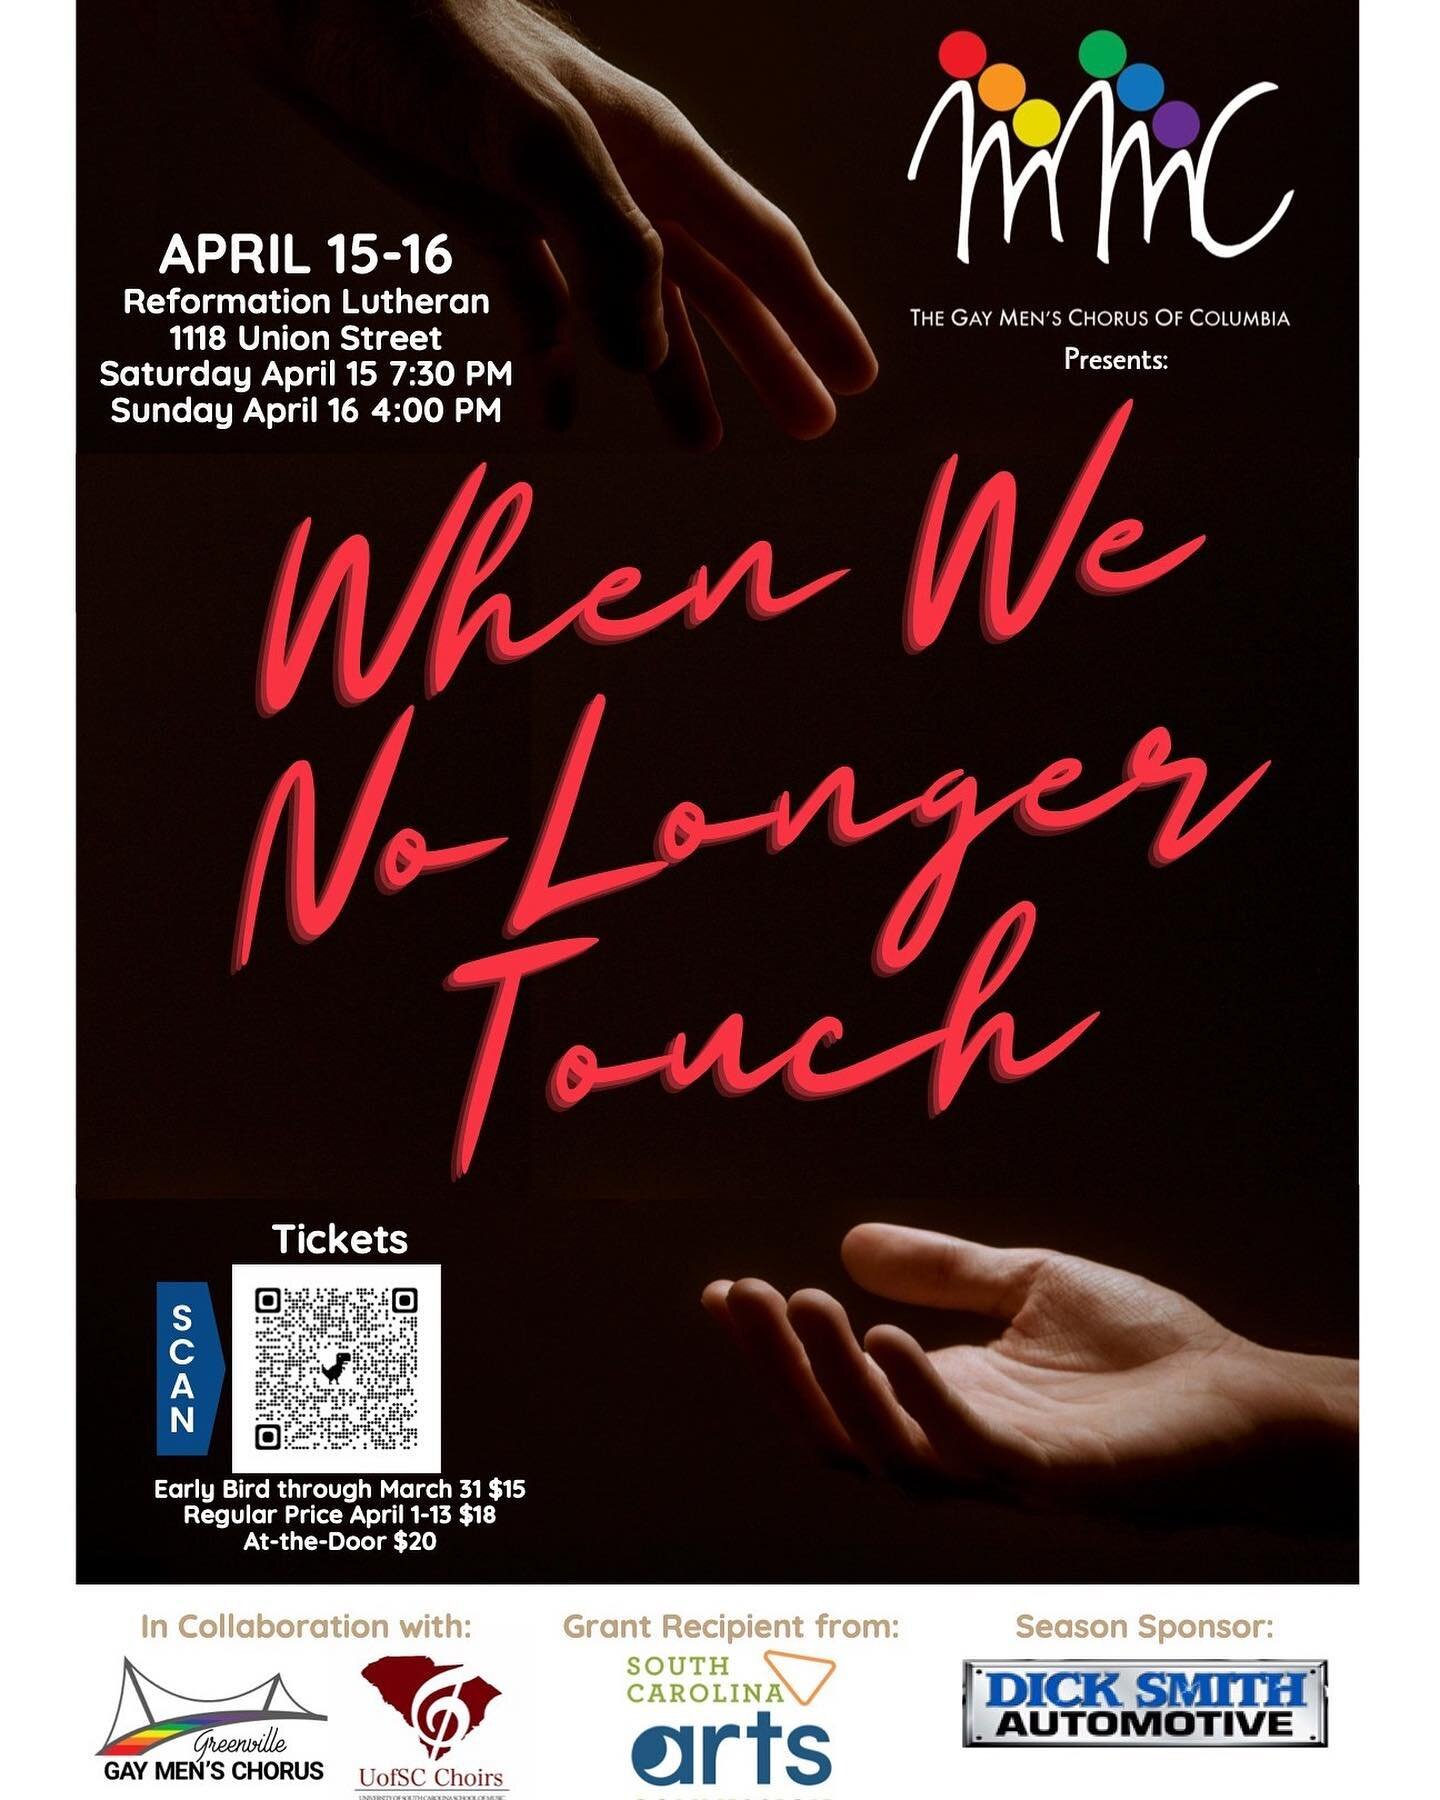 Please come and join us at Reformation Lutheran in Columbia this weekend for &ldquo;When We No Longer Touch,&rdquo; part of our concert series for this season. There will be two concerts to attend: one on Saturday, April 15th at 7:30, and one on Sund